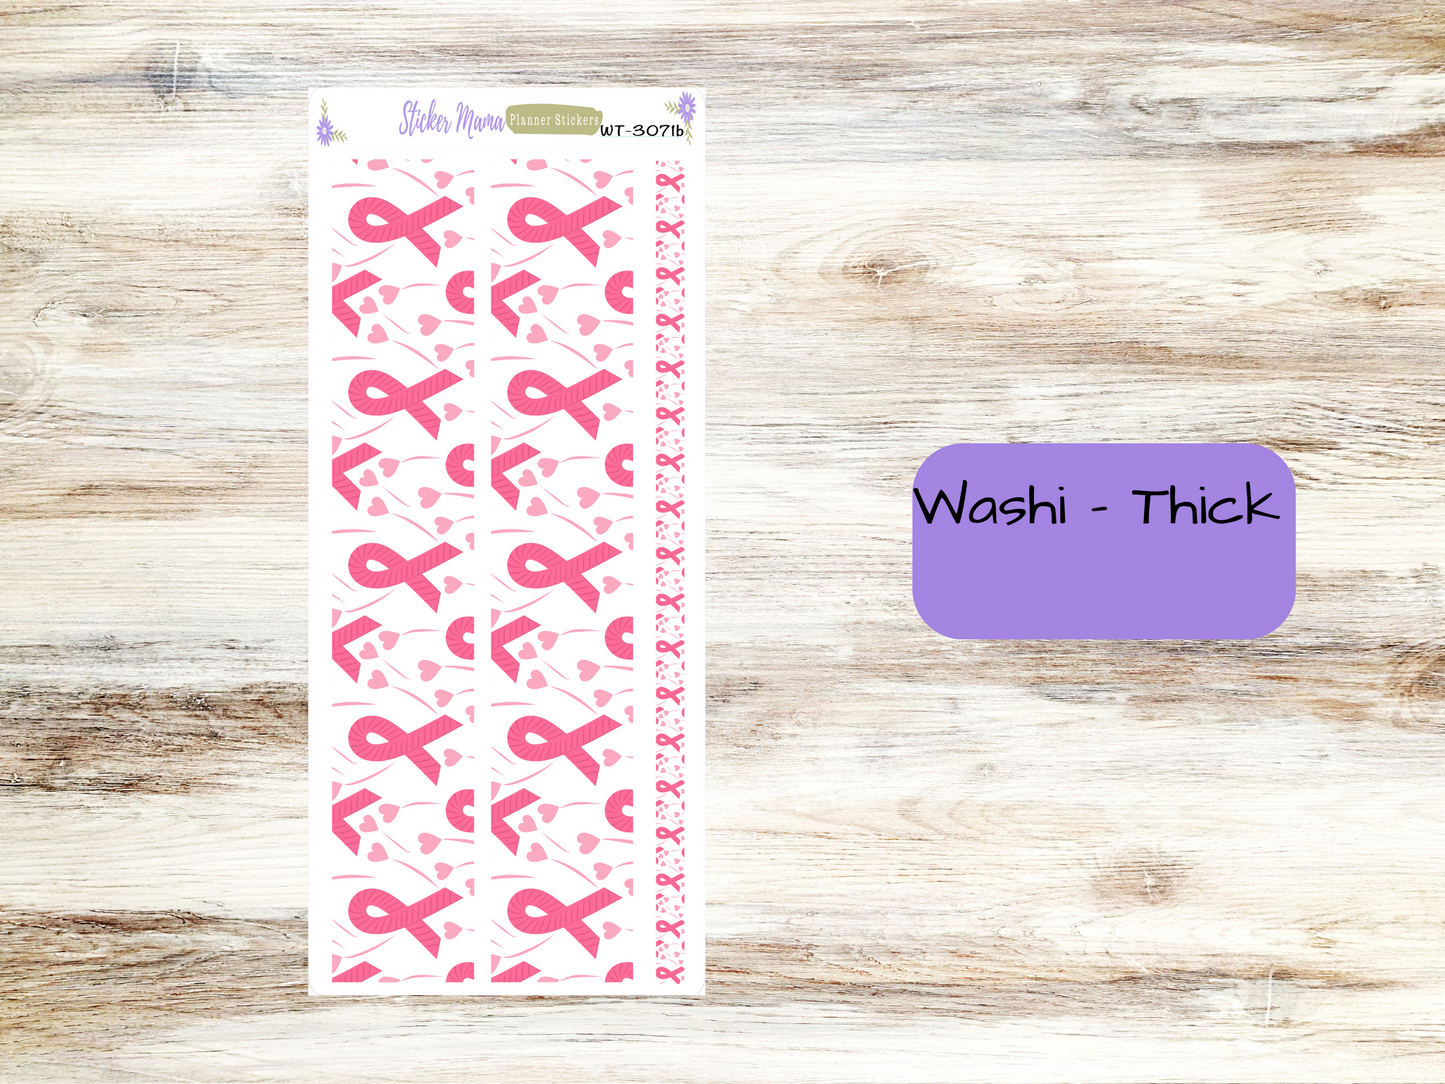 W-3071 - October Breast Cancer Stickers - WASHI STICKERS  - Planner Stickers - Washi for Planners